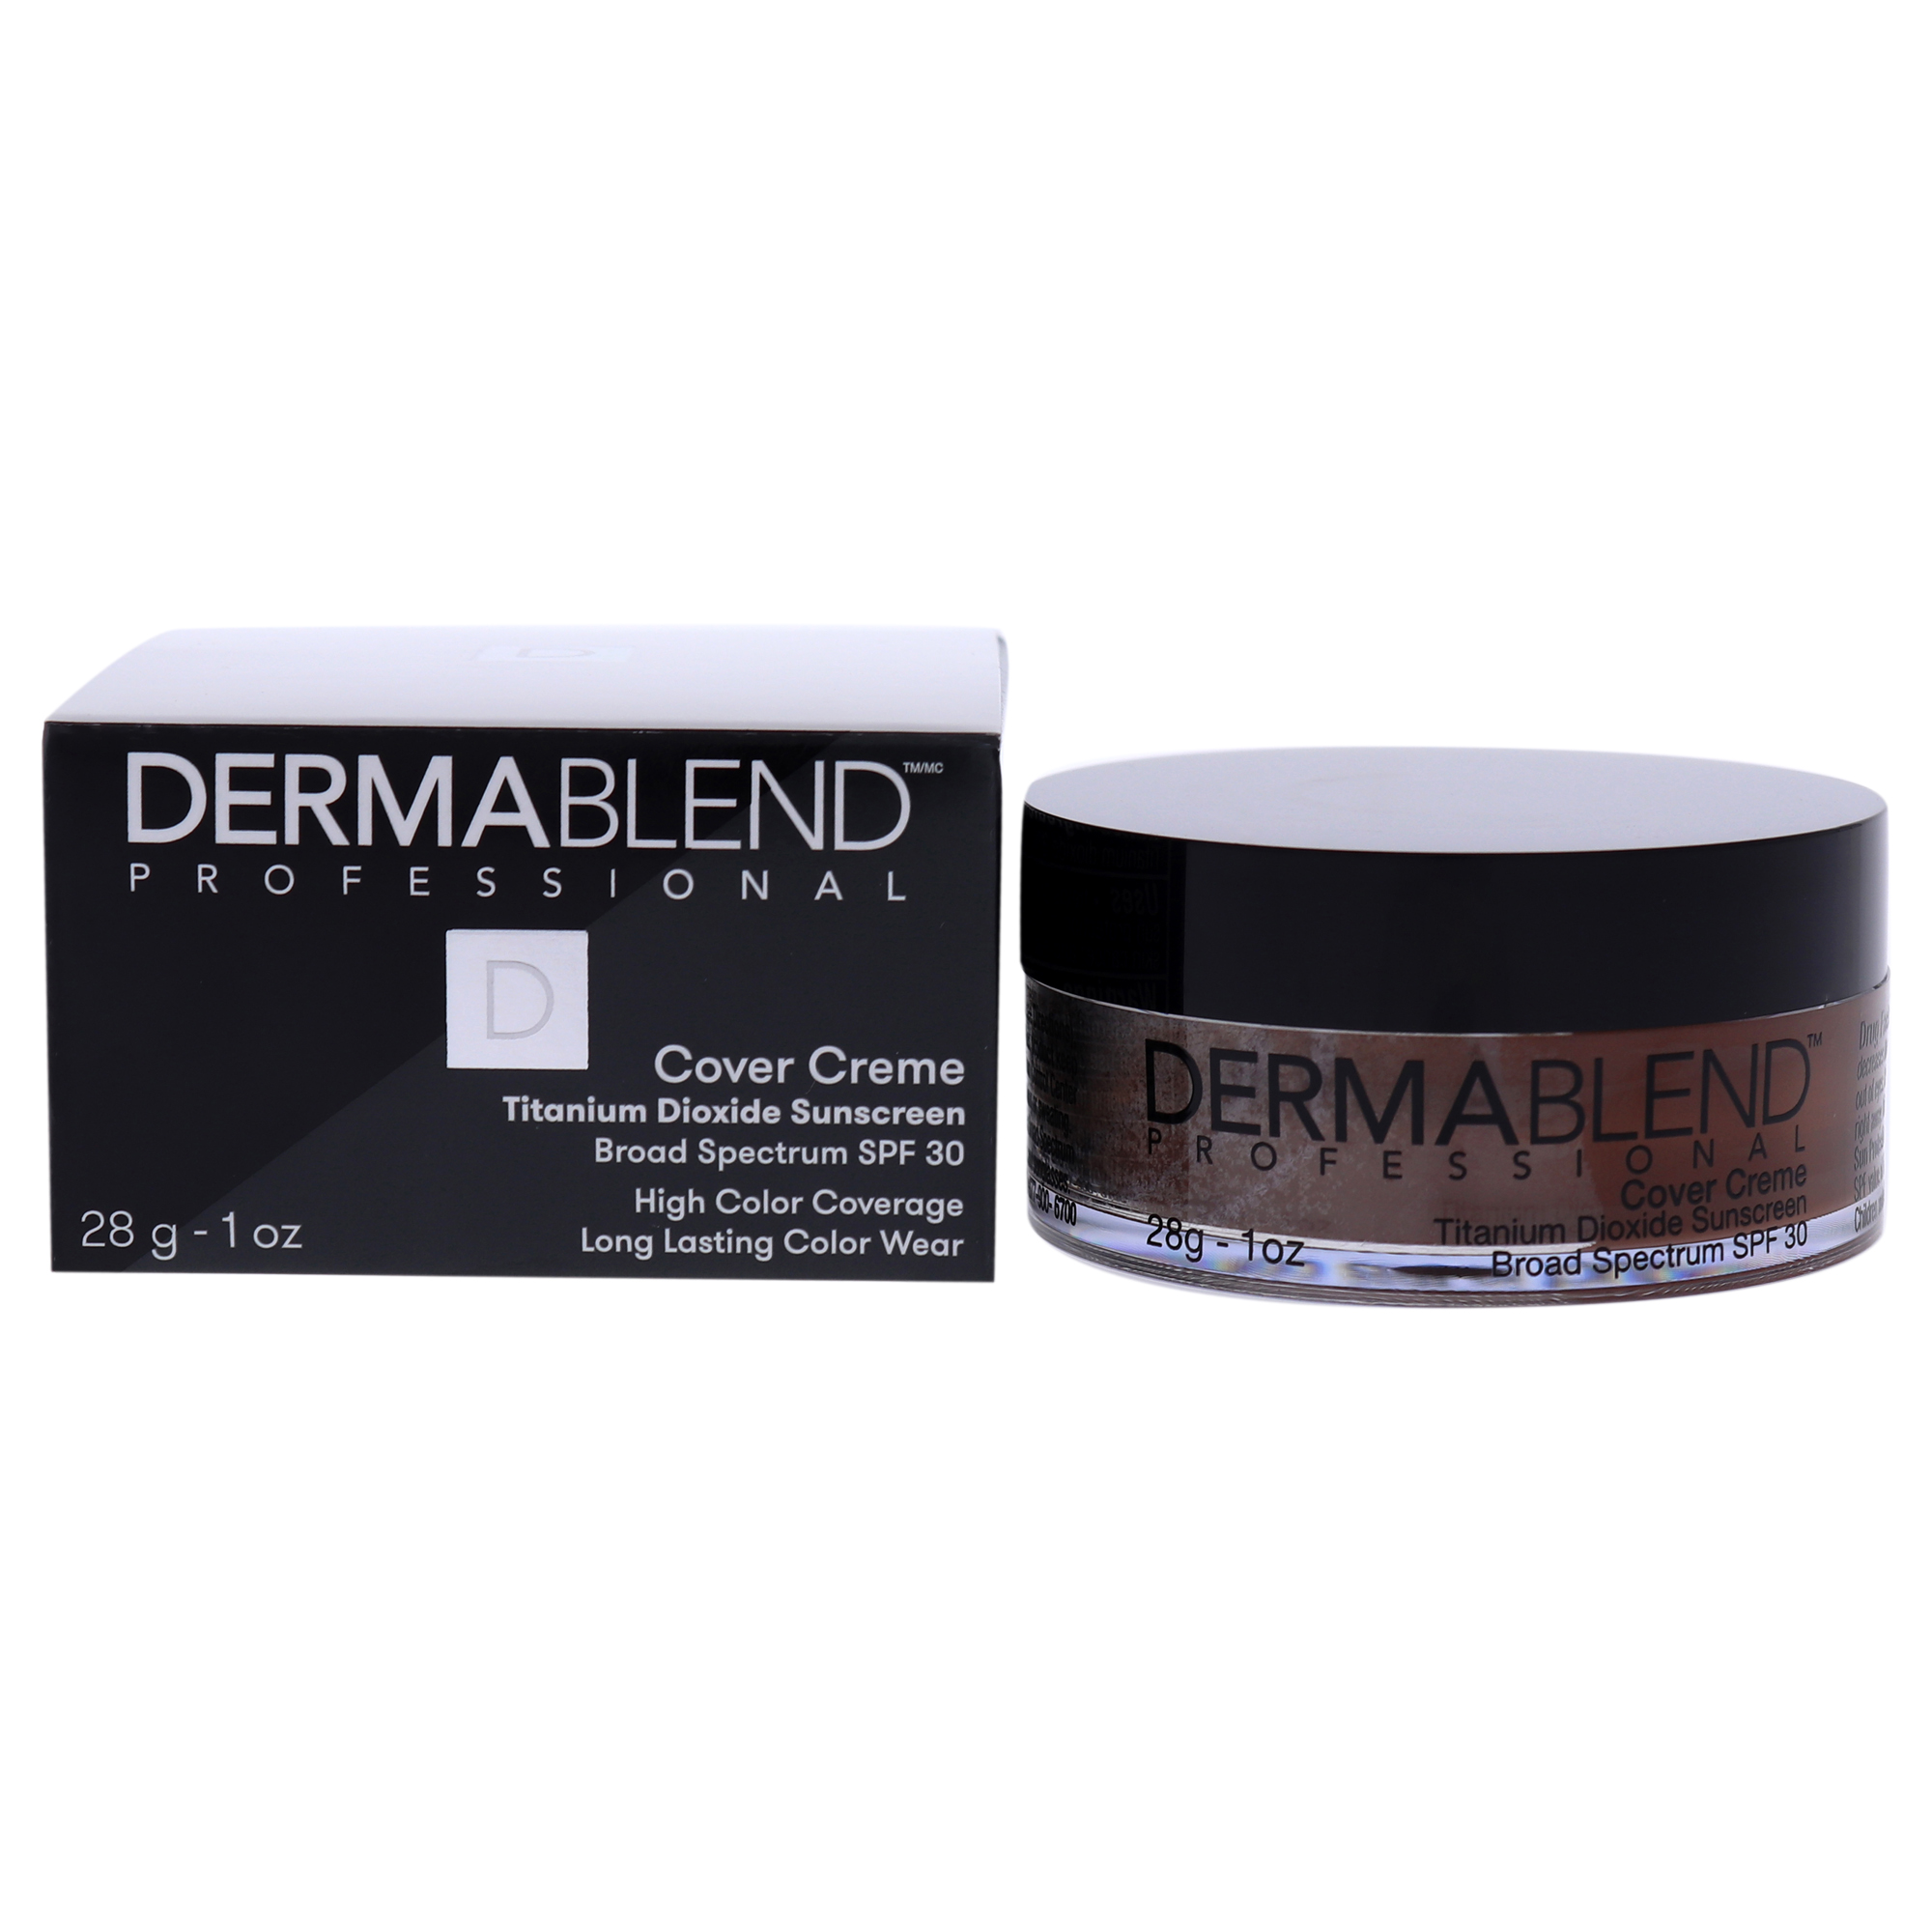 Dermablend Cover Creme High Color Coverage SPF 30 - 90N Deep Brown , 1 oz Foundation - image 1 of 6